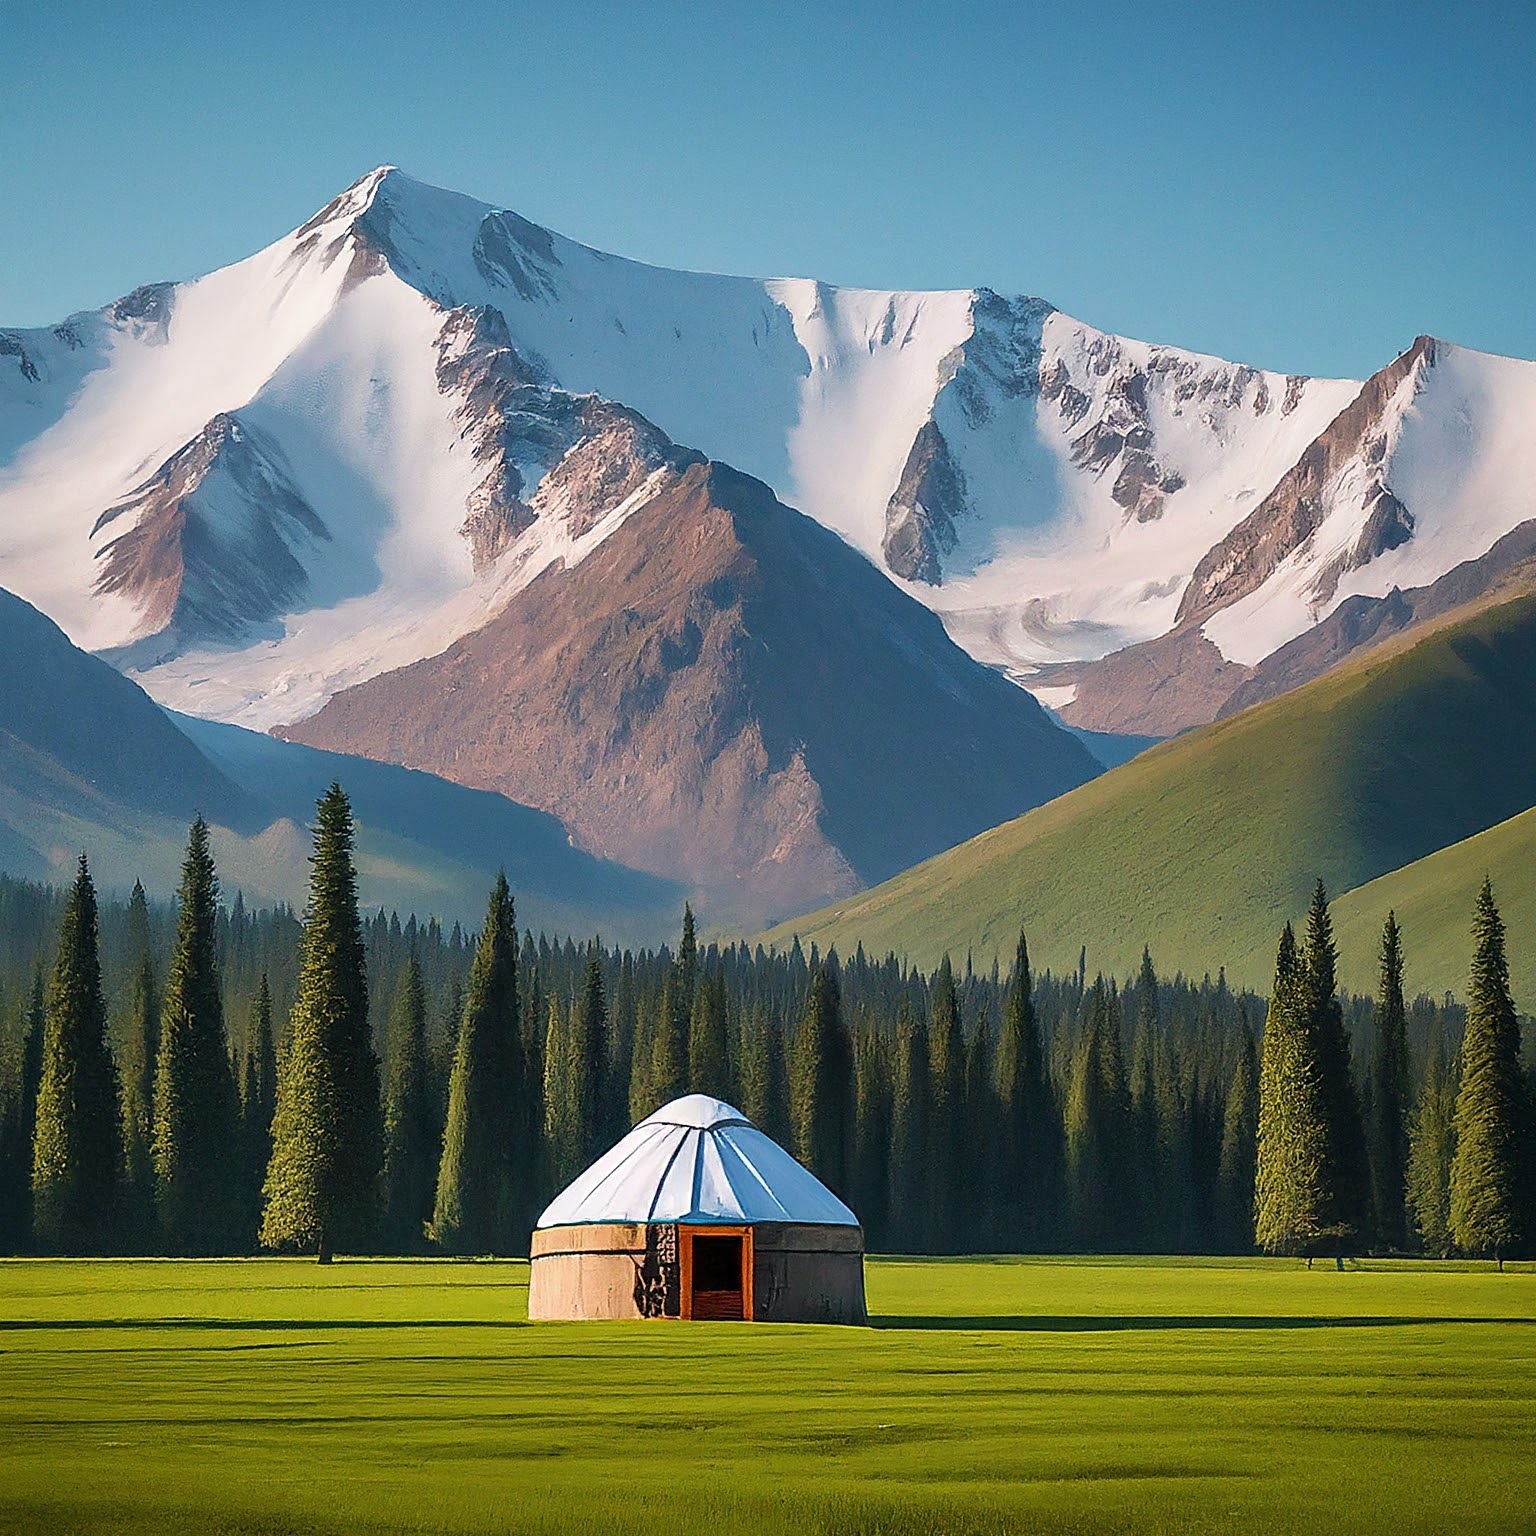 Karakol, Kyrgyzstan: Tian Shan mountains with snow and a traditional yurt in a green meadow.